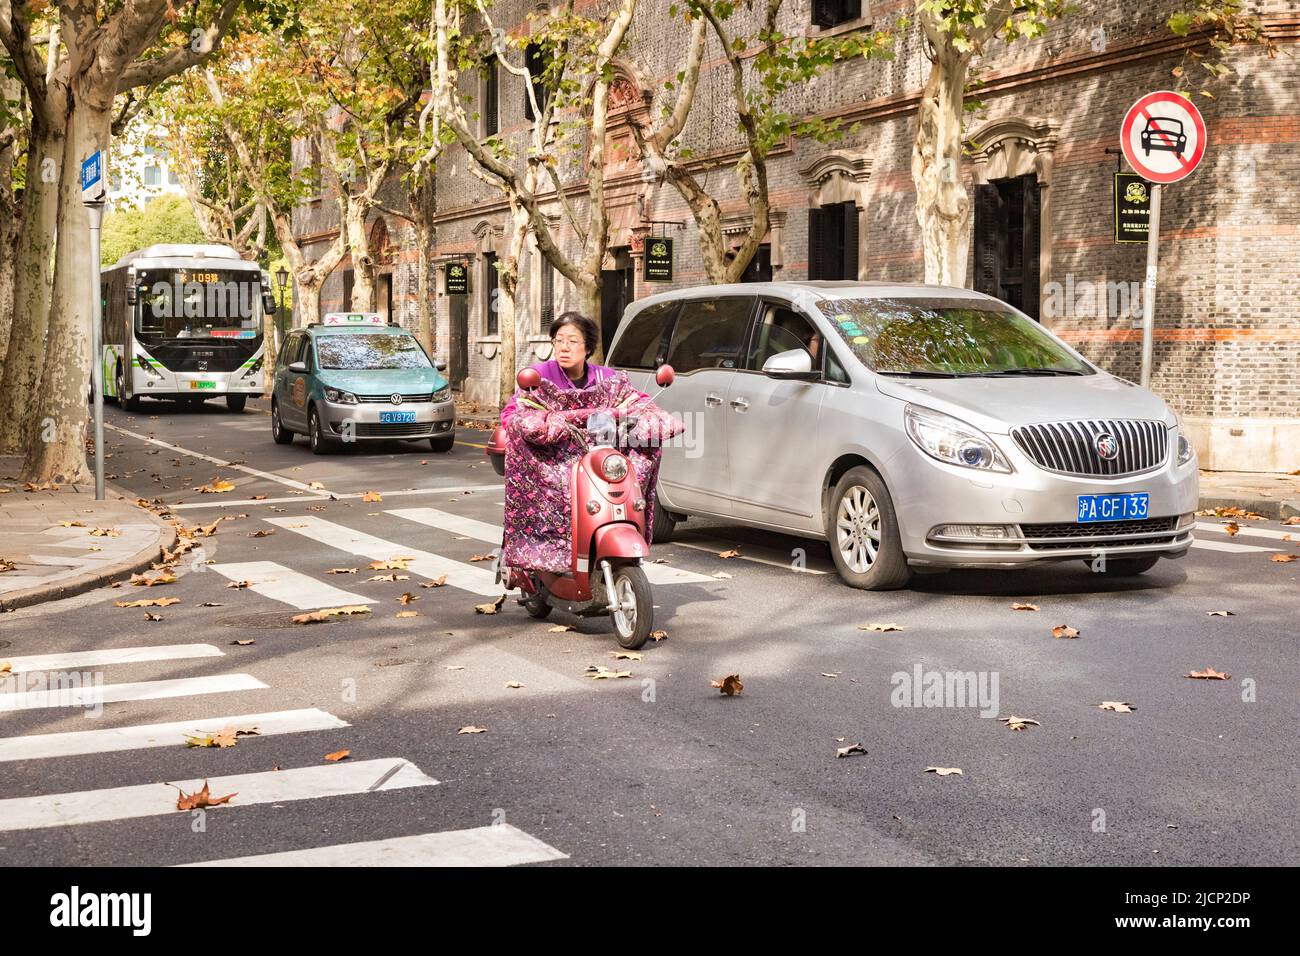 30 November 2018: Shanghai, China - Woman riding electric scooter with body blanket attachment to keep warm. Stock Photo